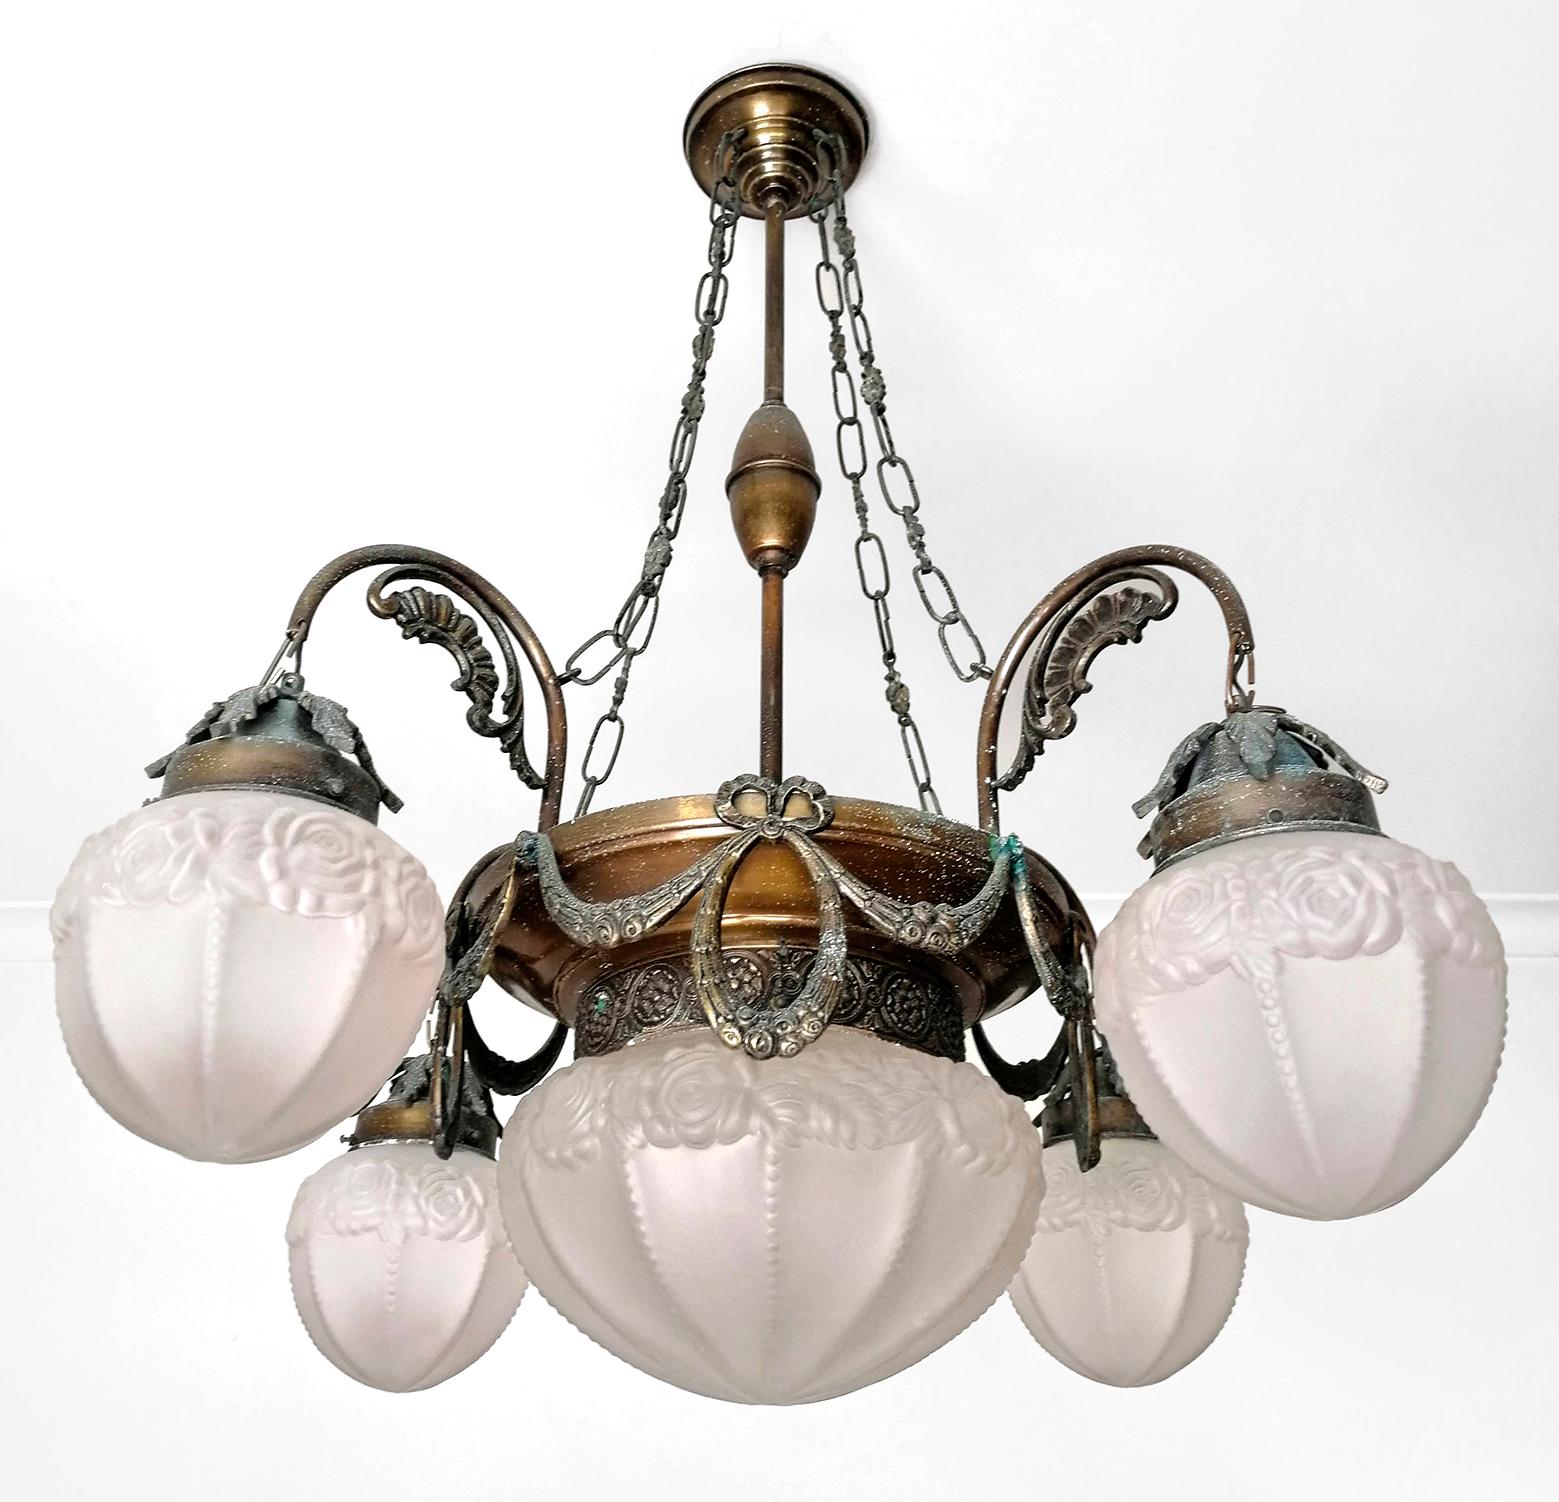 French Art Deco and Art Nouveau Brass and Frosted Glass 5-Light Chandelier In Good Condition For Sale In Coimbra, PT